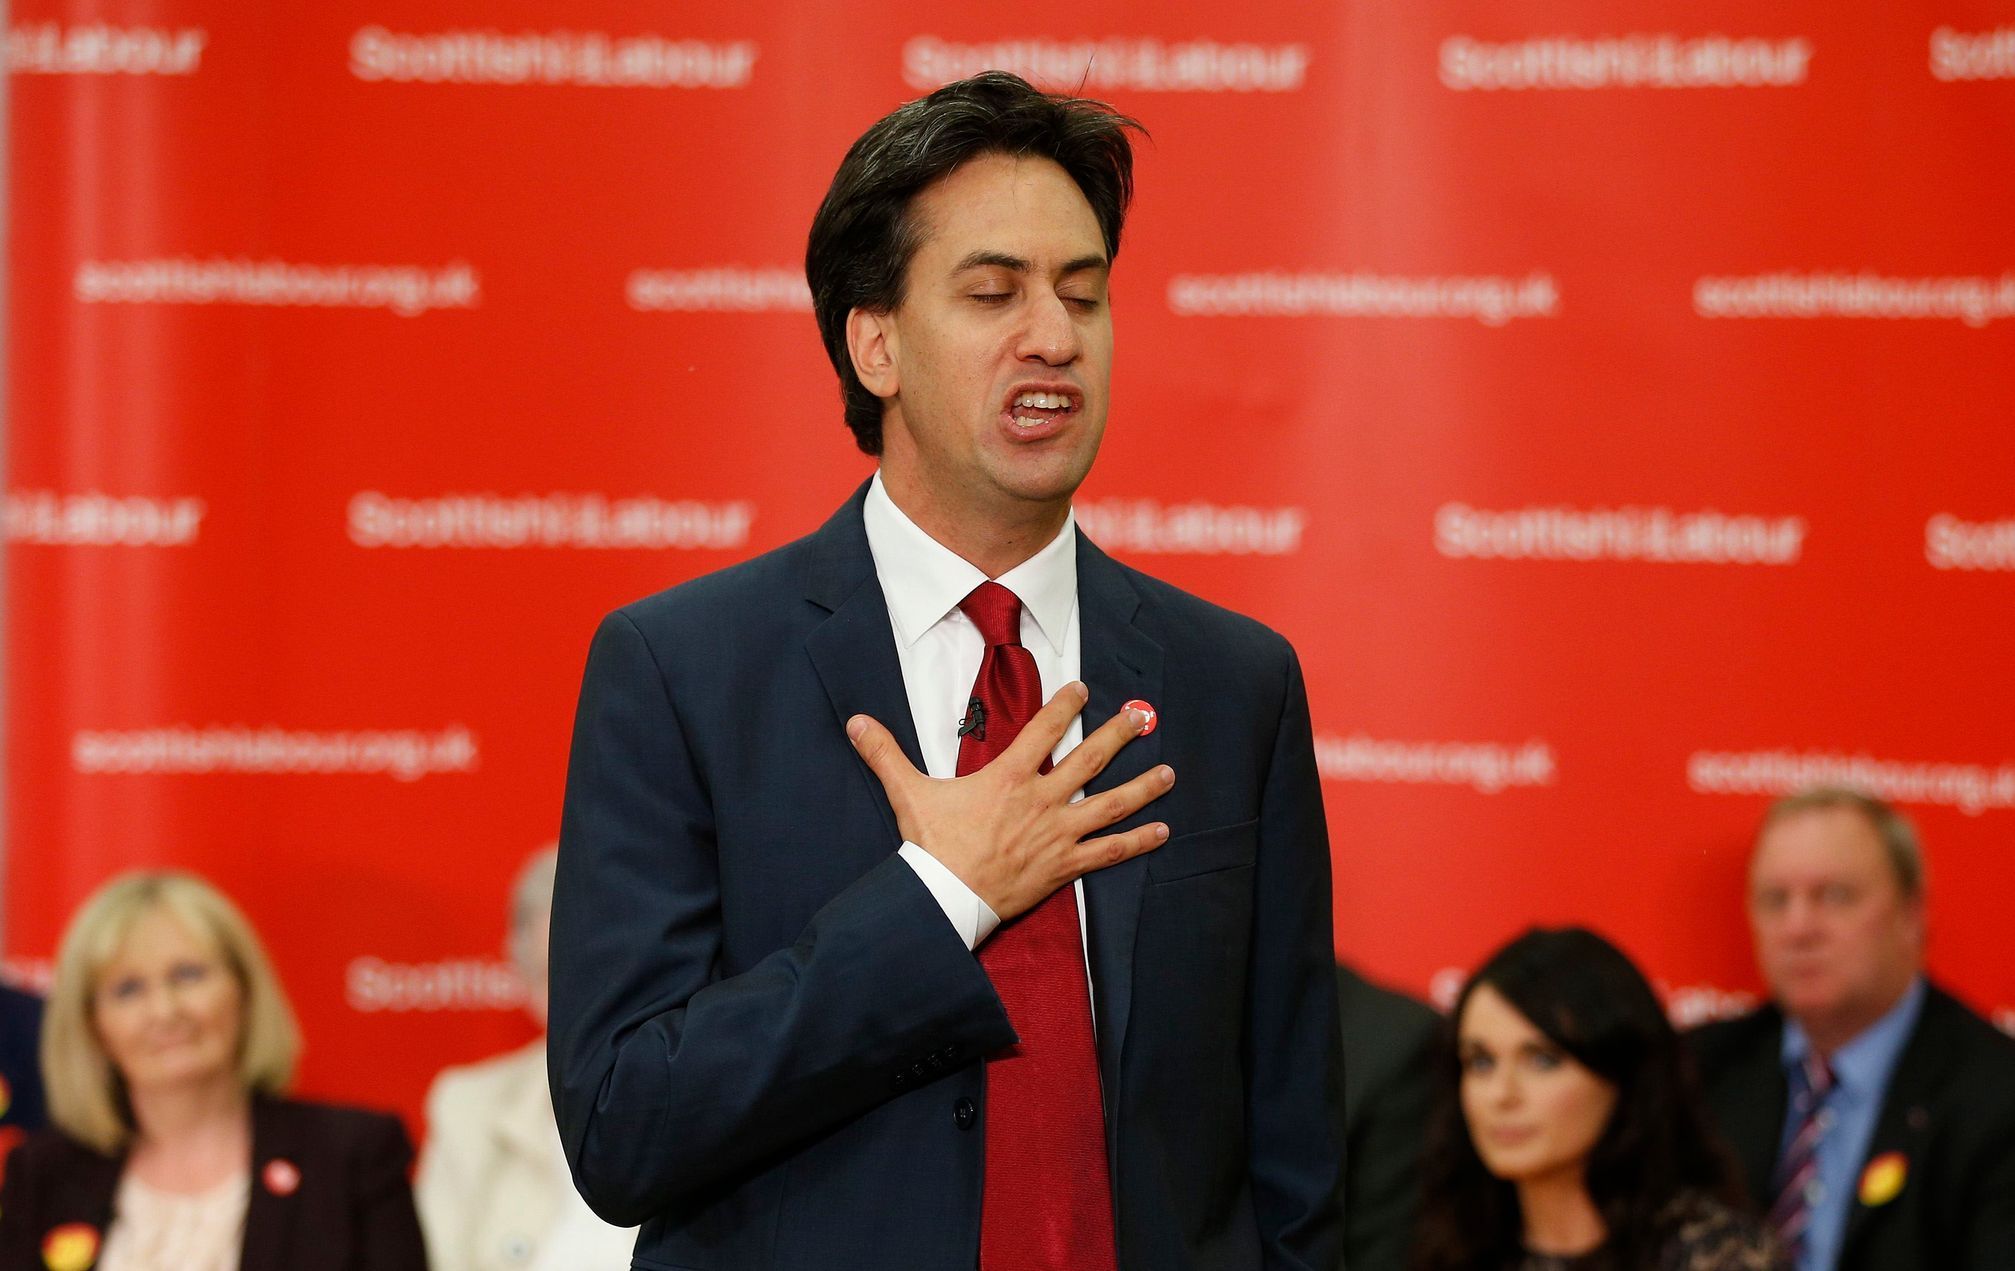 Britain's opposition Labour Party leader Ed Miliband speaks during a campaign meeting in Cumbernauld in Glasgow